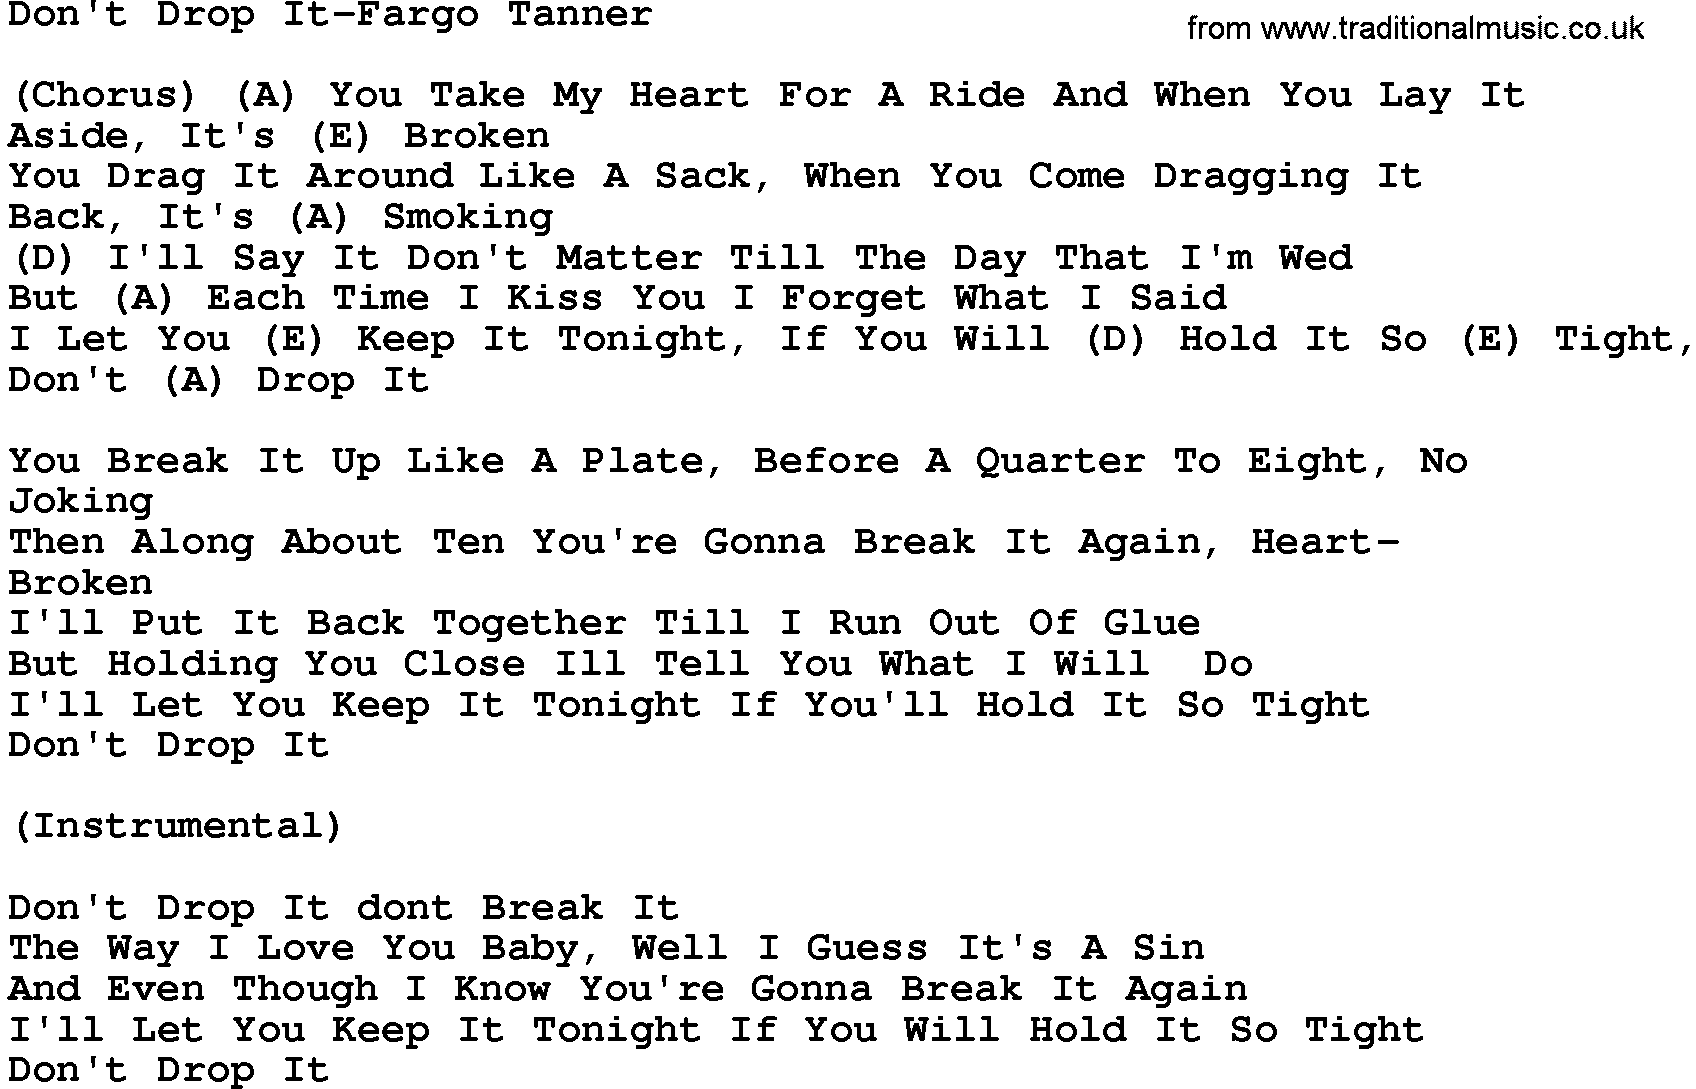 Country music song: Don't Drop It-Fargo Tanner lyrics and chords